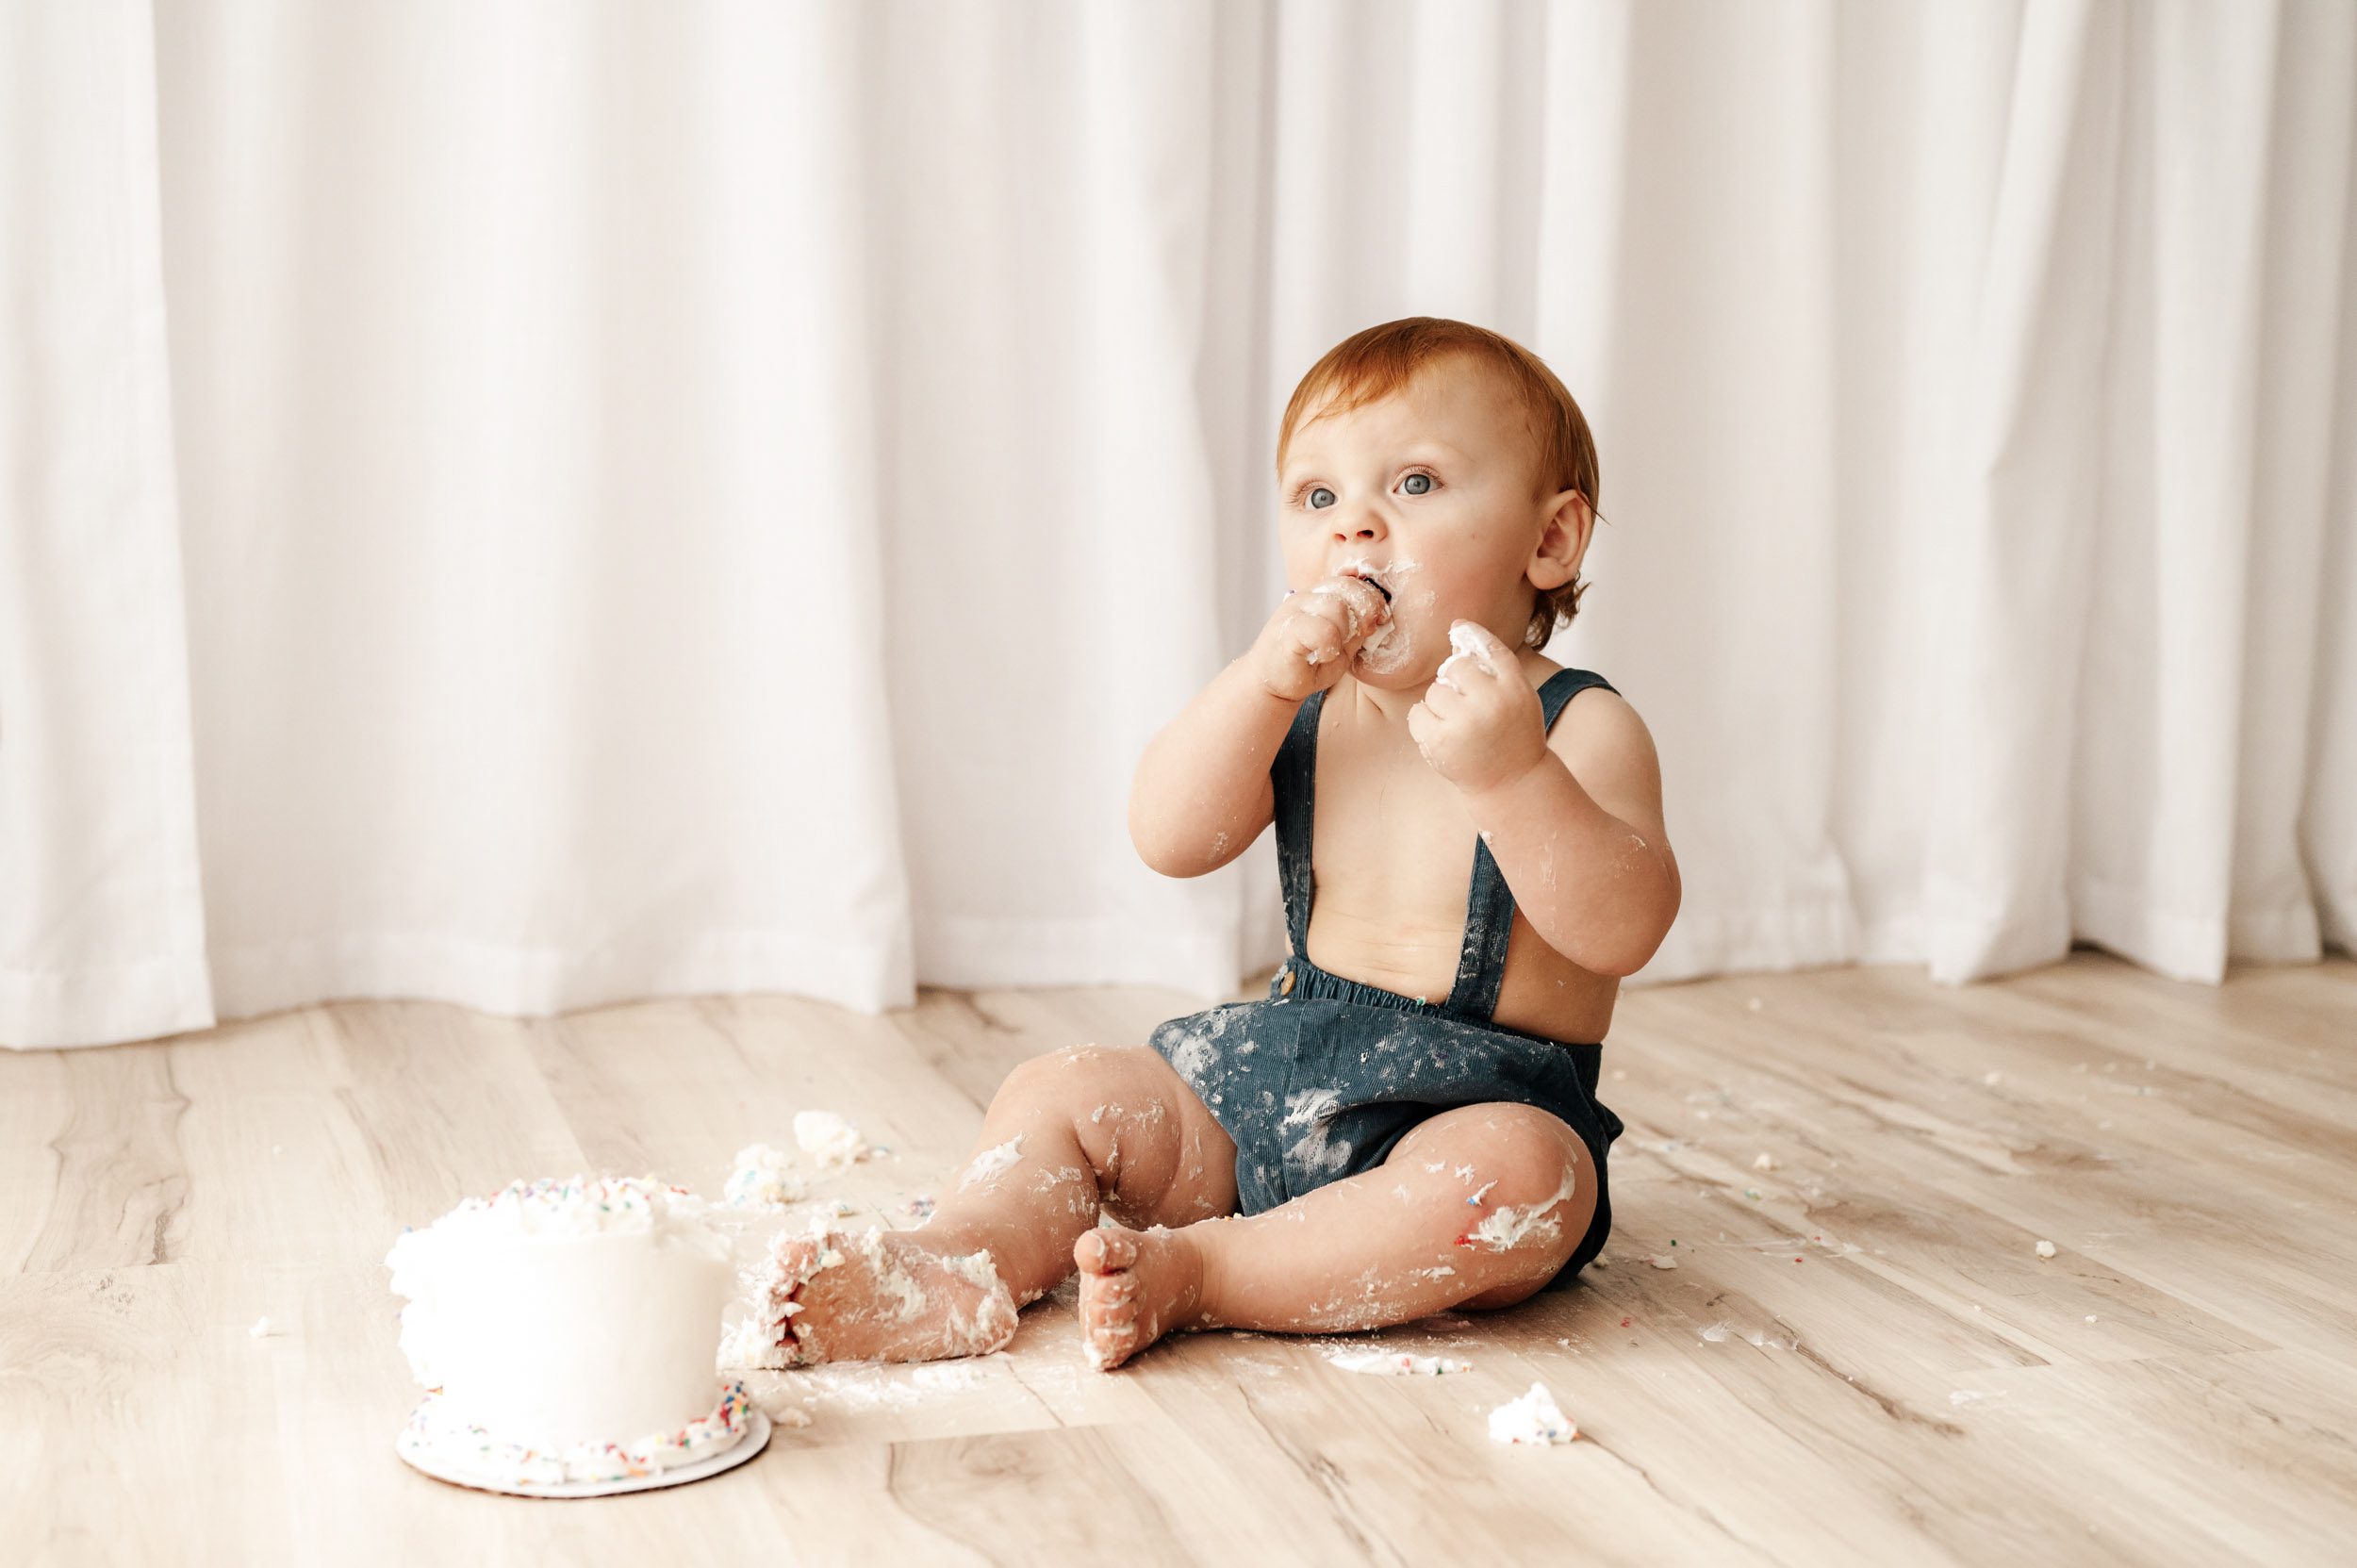 a young boy wearing blue shorts with suspenders sitting on the floor in front of a small white cake with cake all over his arms and legs and the floor in front of him as he puts a bite of cake into his mouth with his hand during a 1st birthday cake smash photoshoot